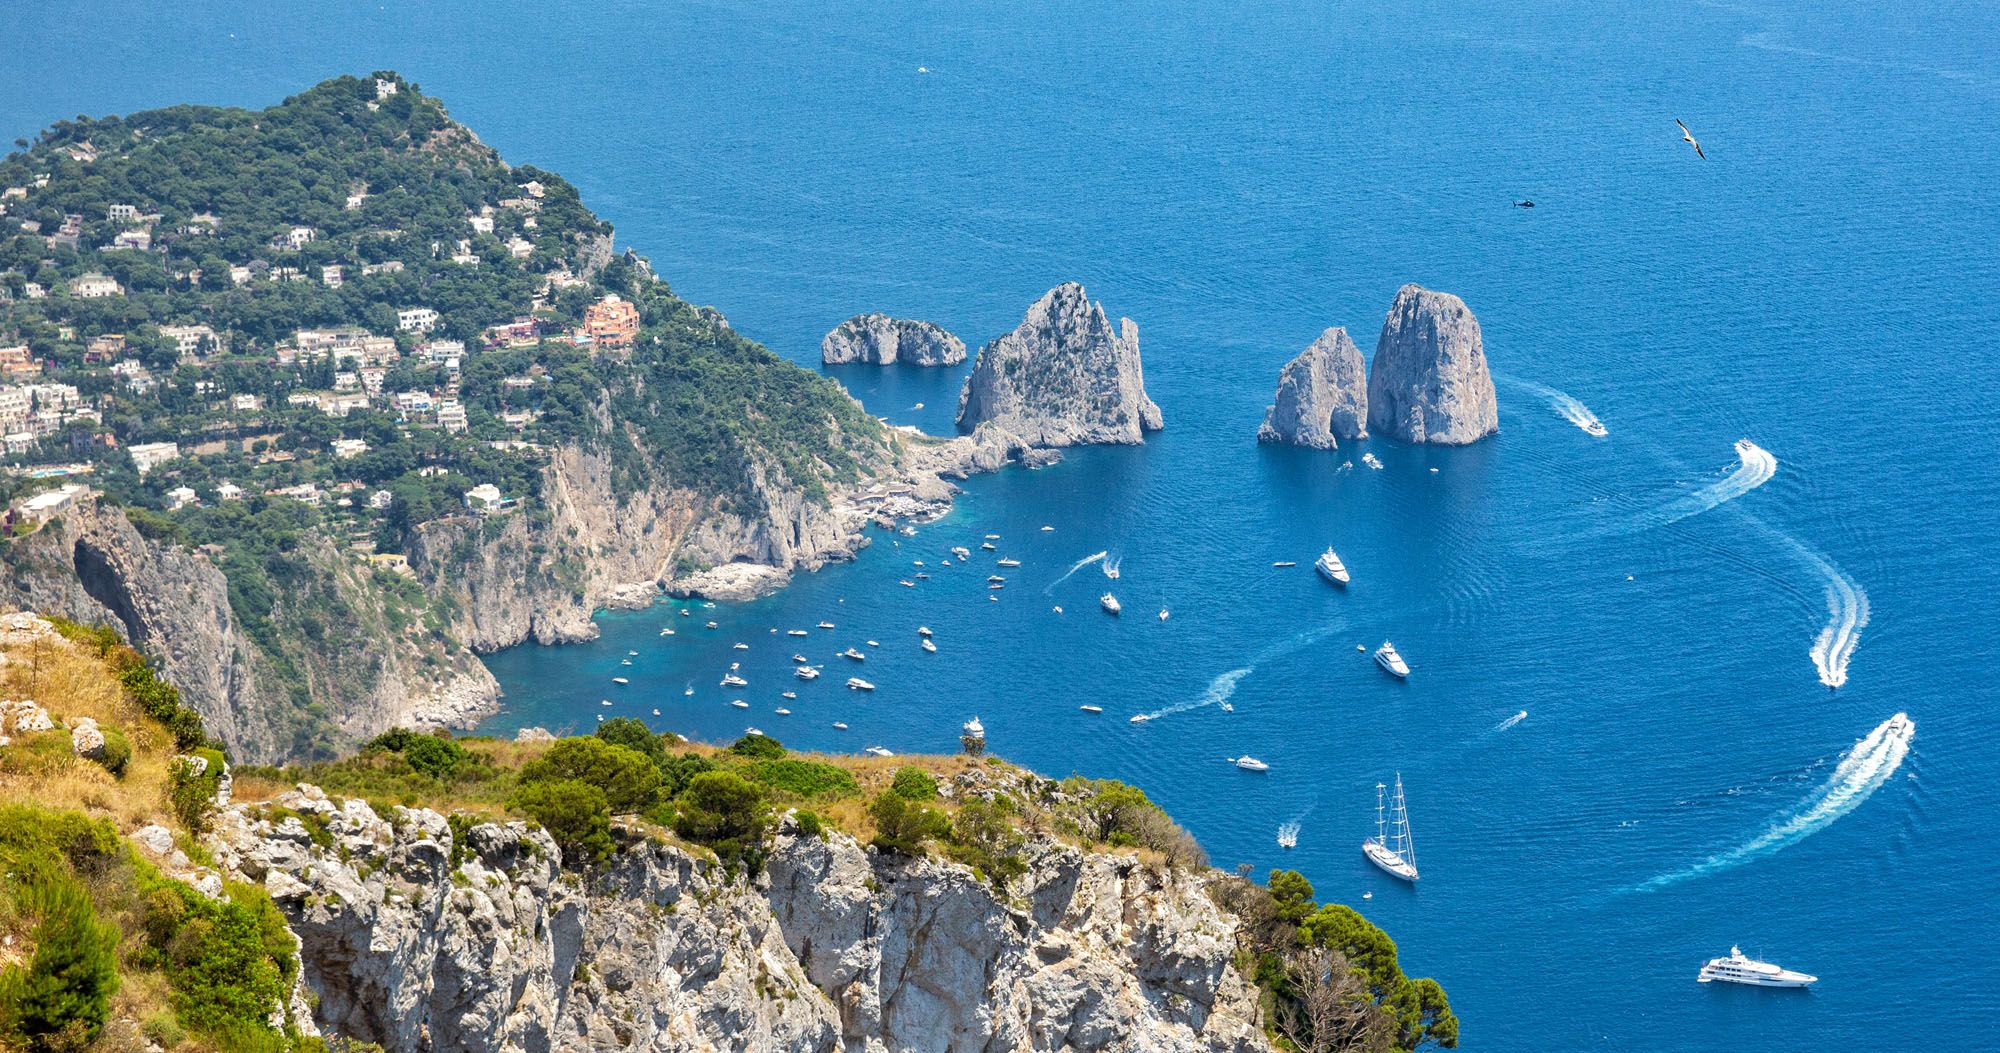 Featured image for “One Day in Capri: How to Plan the Perfect Capri Day Trip”